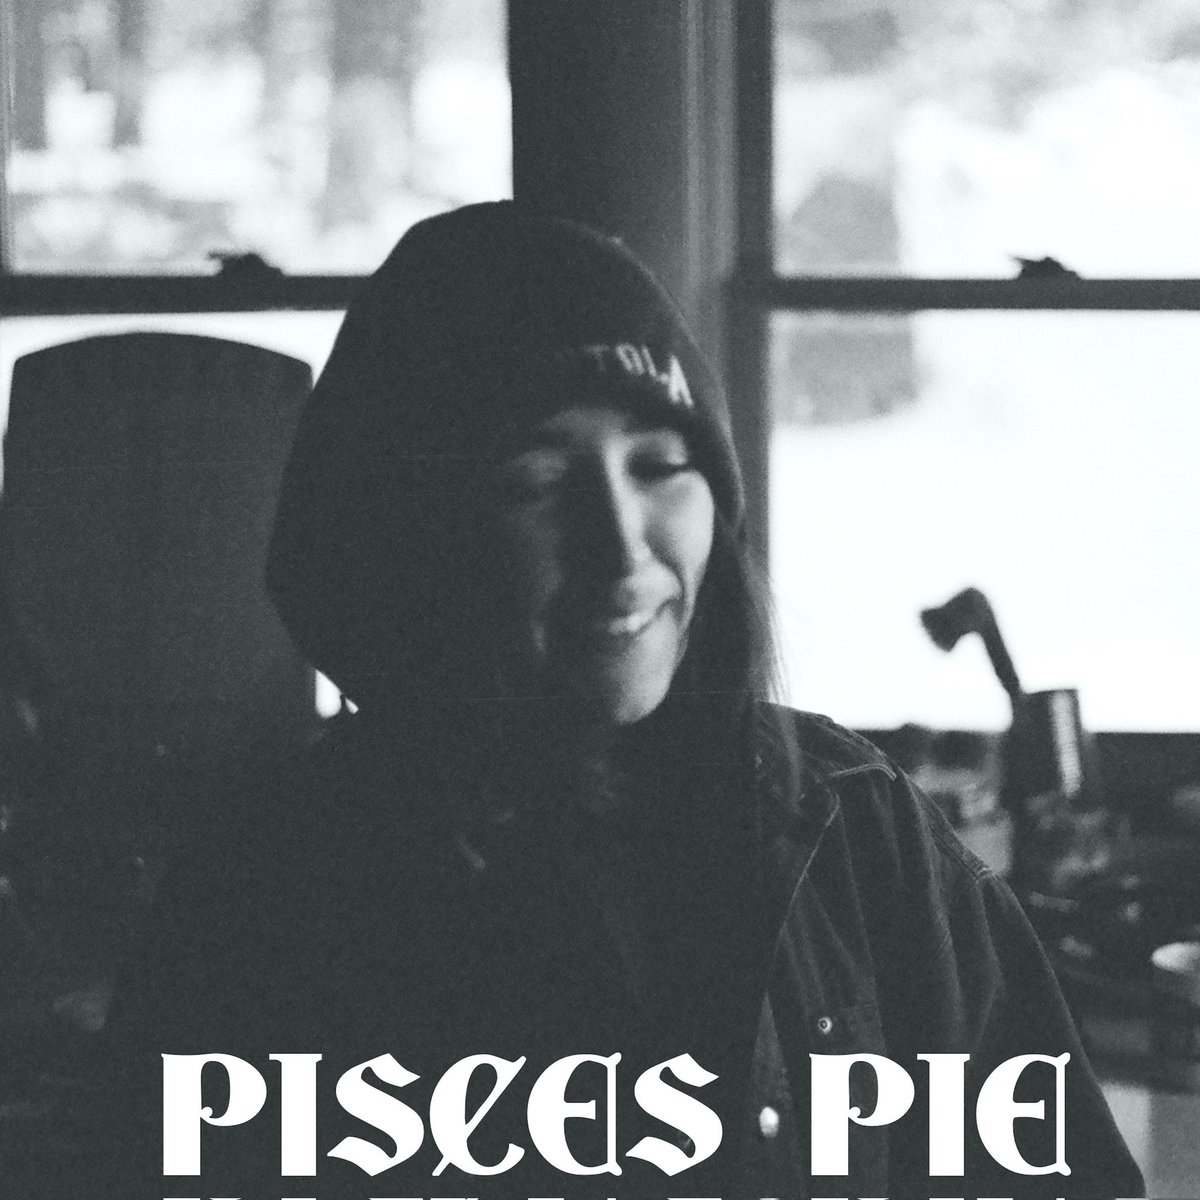 Listen to the album 'Pisces Pie' and discover the work of the charismatic artist Odelet. 
#indiedockmusicblog #soul

indiedockmusicblog.co.uk/?p=23962